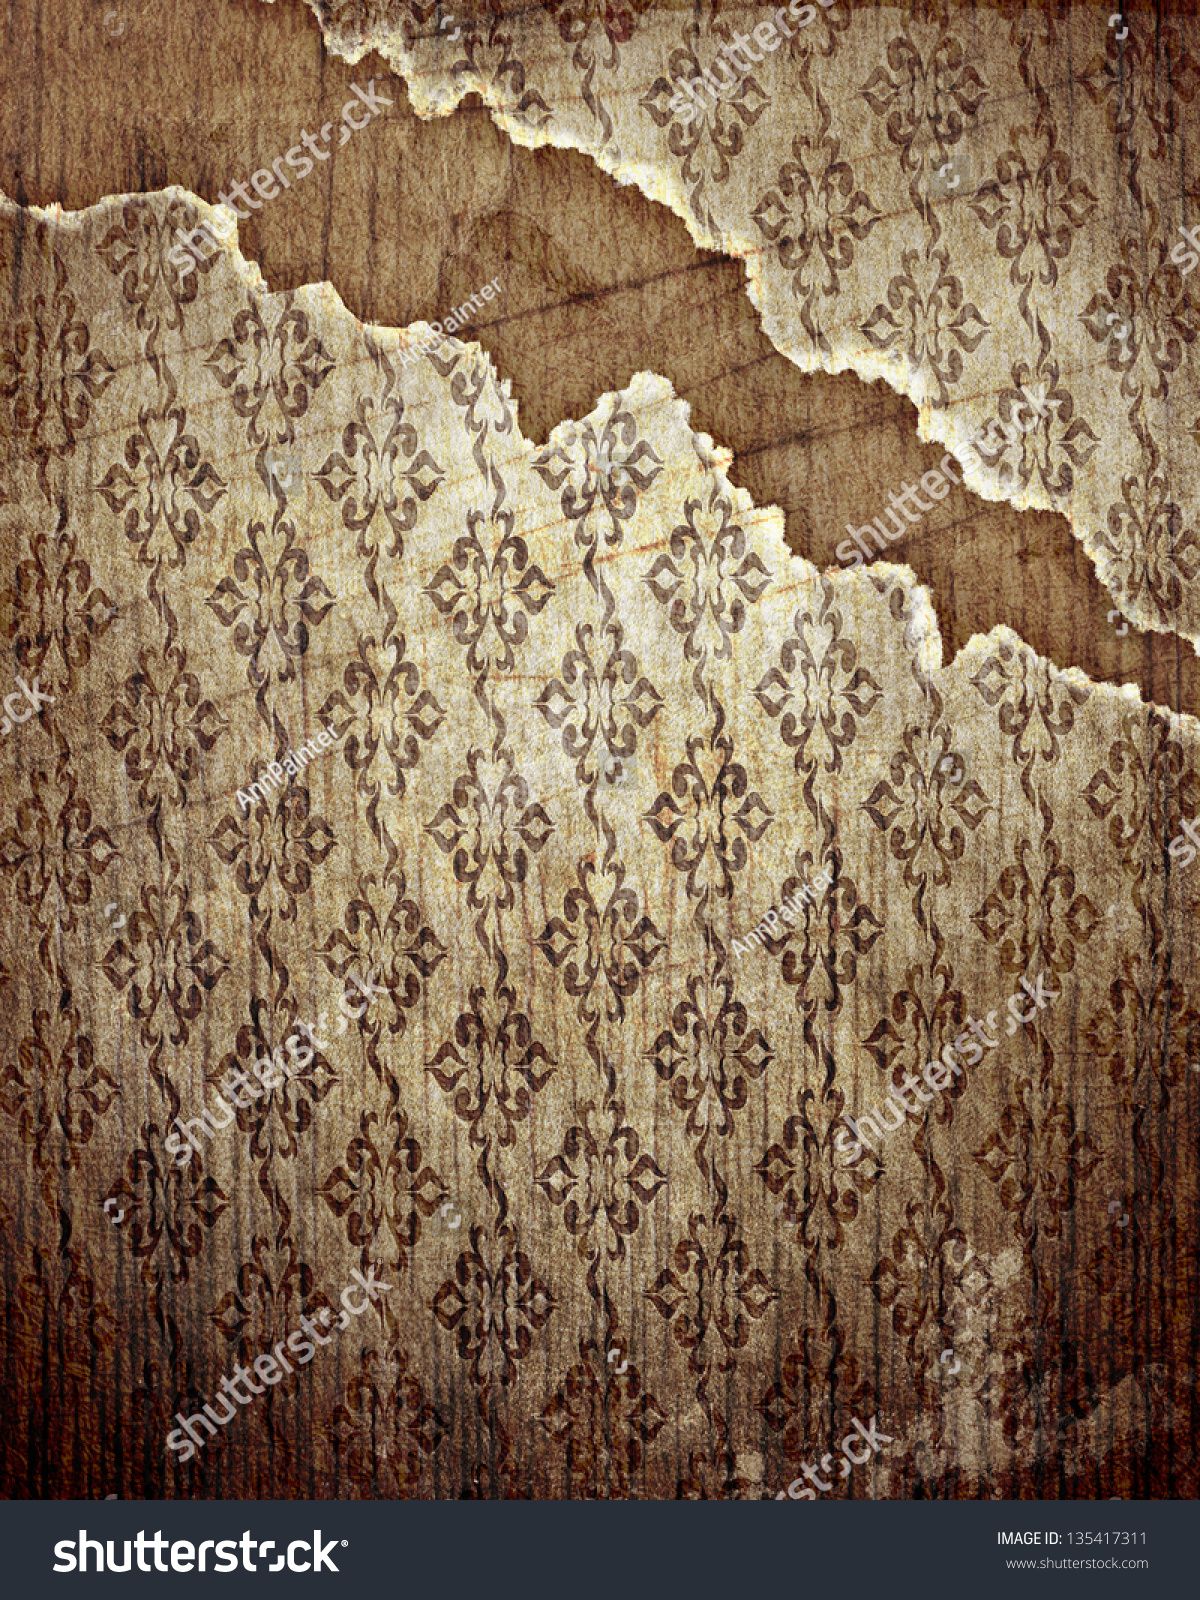 An Old Vintage Ripped Wallpaper Stock Image  Image of blank texture  121628459